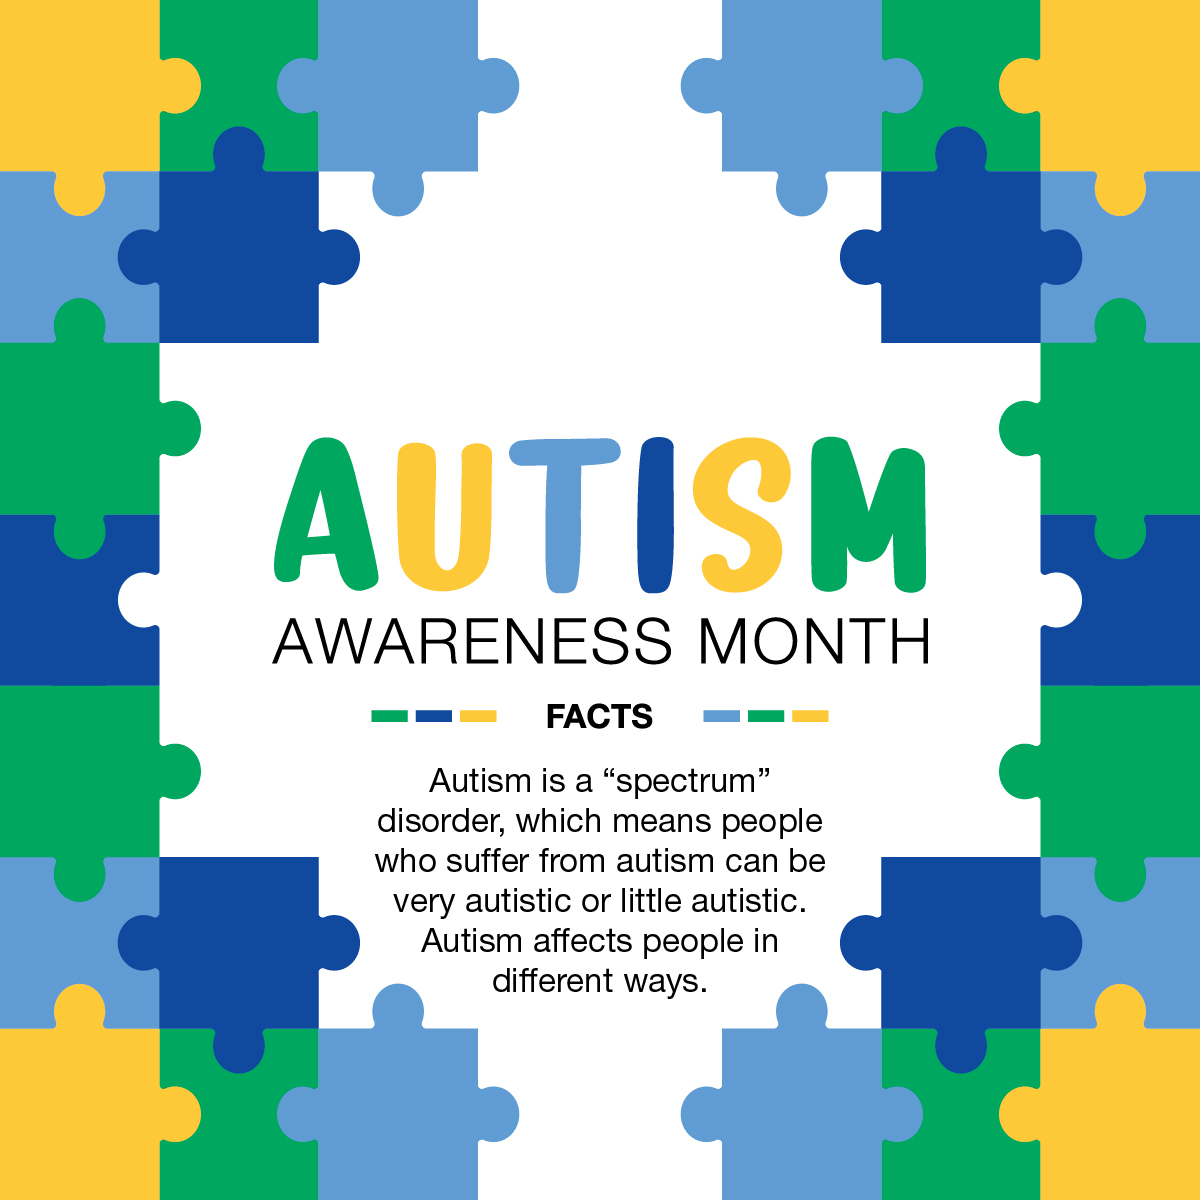 Help increase awareness and acceptance of autism spectrum disorder by sharing information and resources based on the latest research. 

ecs.page.link/gDAeJ

#AutismAwarenessMonth #celebratedifferences #PACCARWinchautismawareness